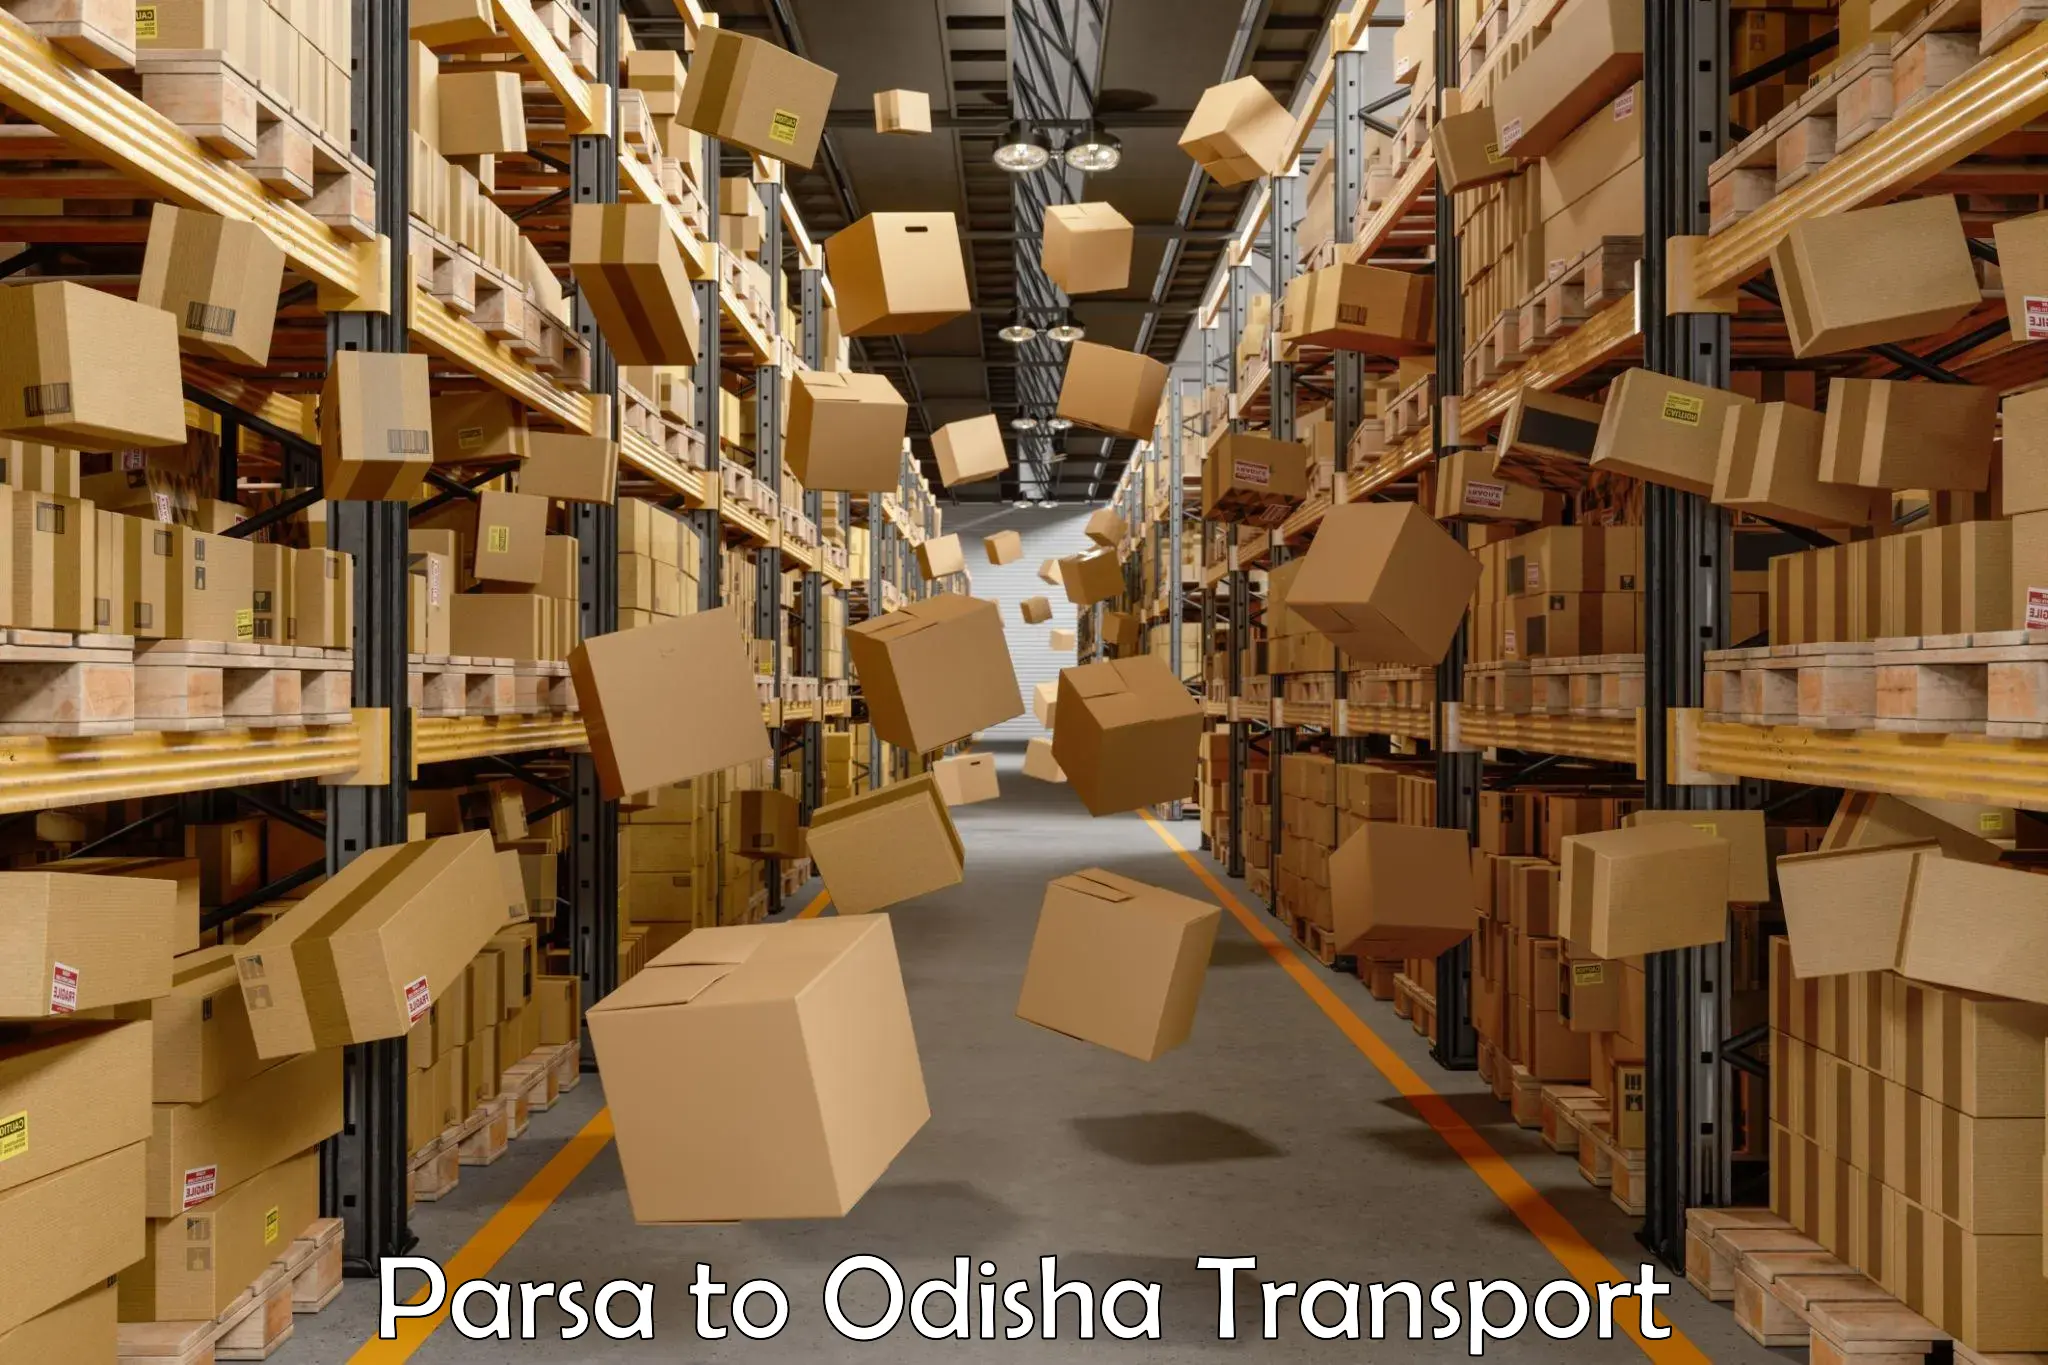 Commercial transport service Parsa to Jeypore